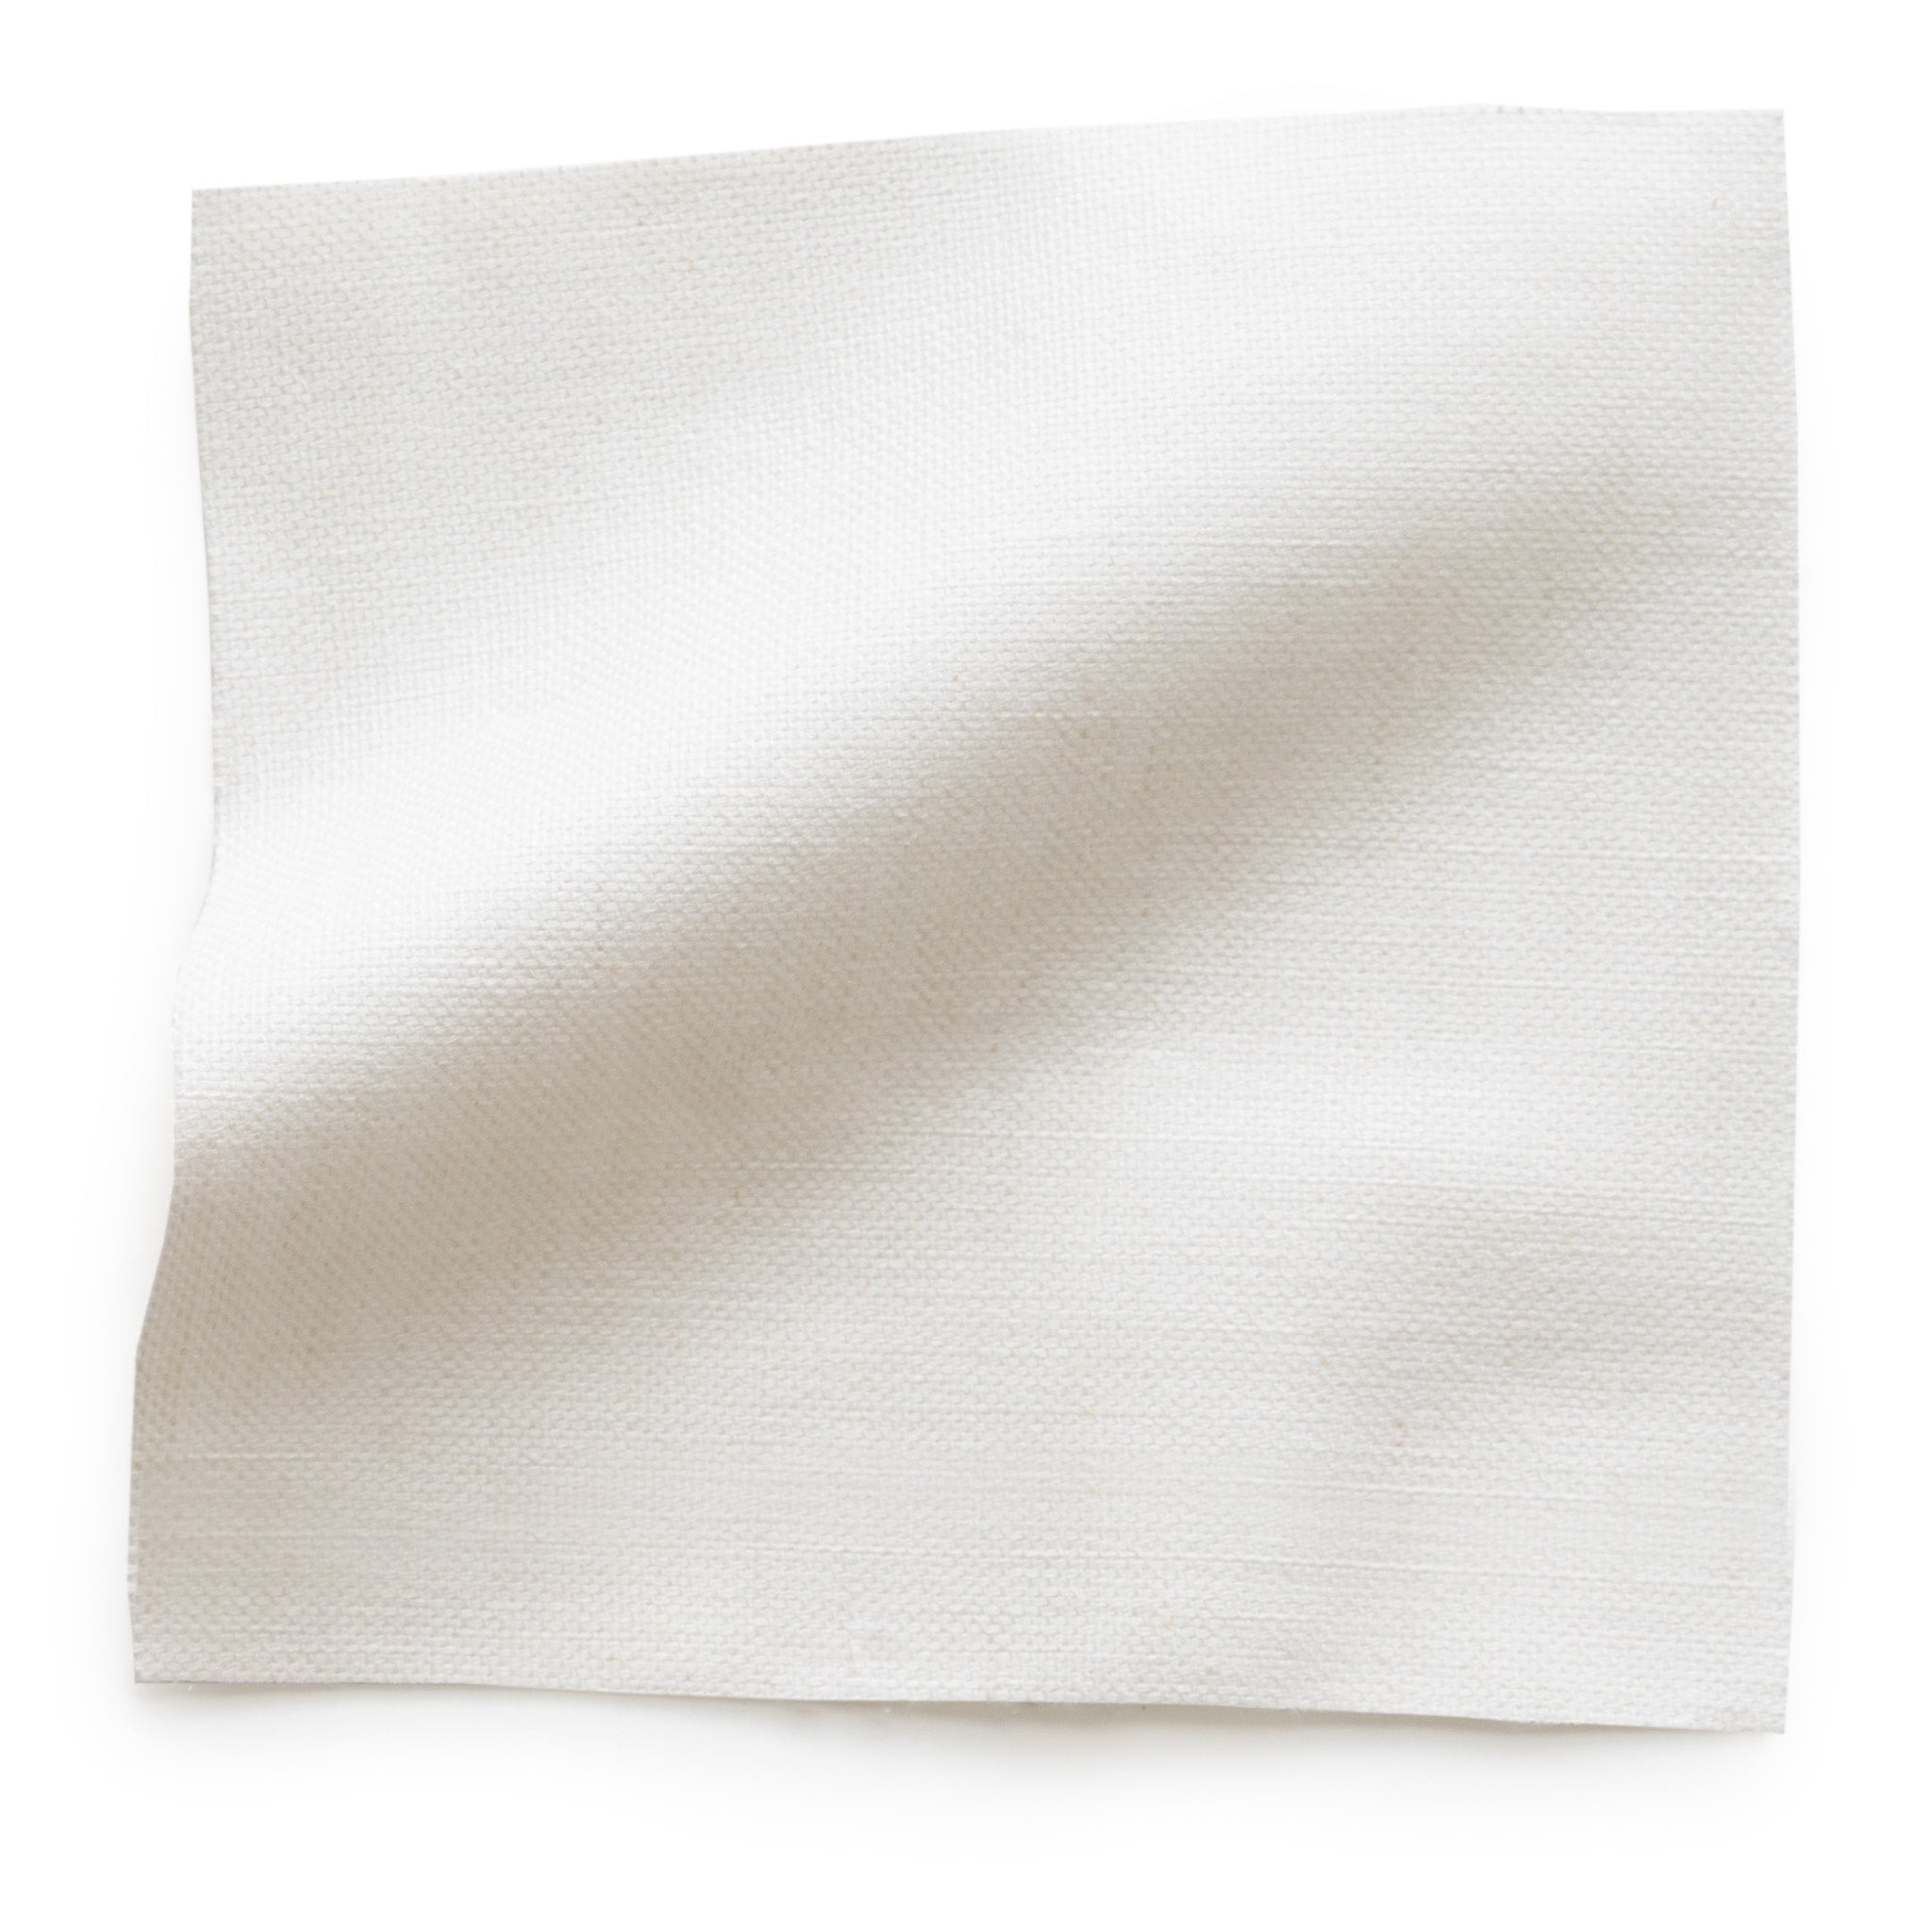 Natural White Linen Swatch